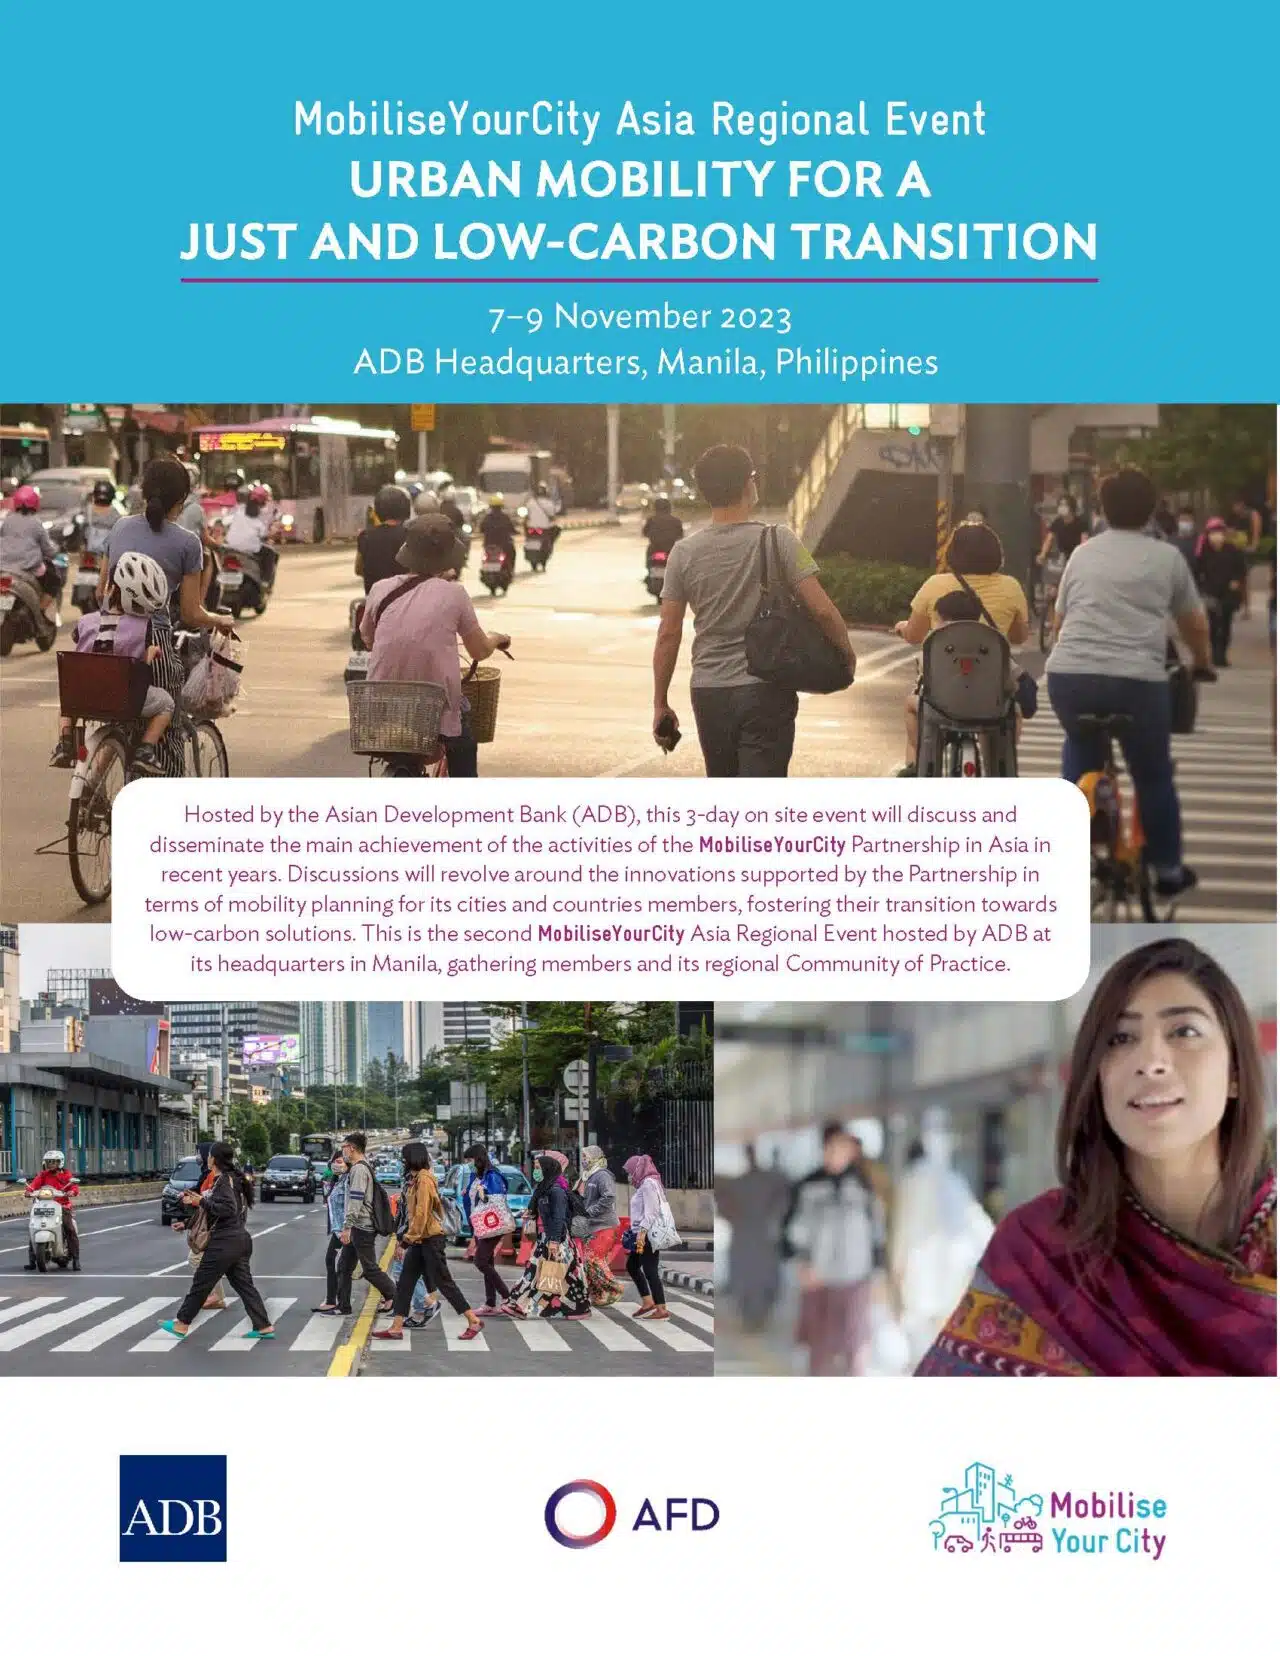 Thumbnail for Urban Mobility for a Just and Low-Carbon Transition in Manila